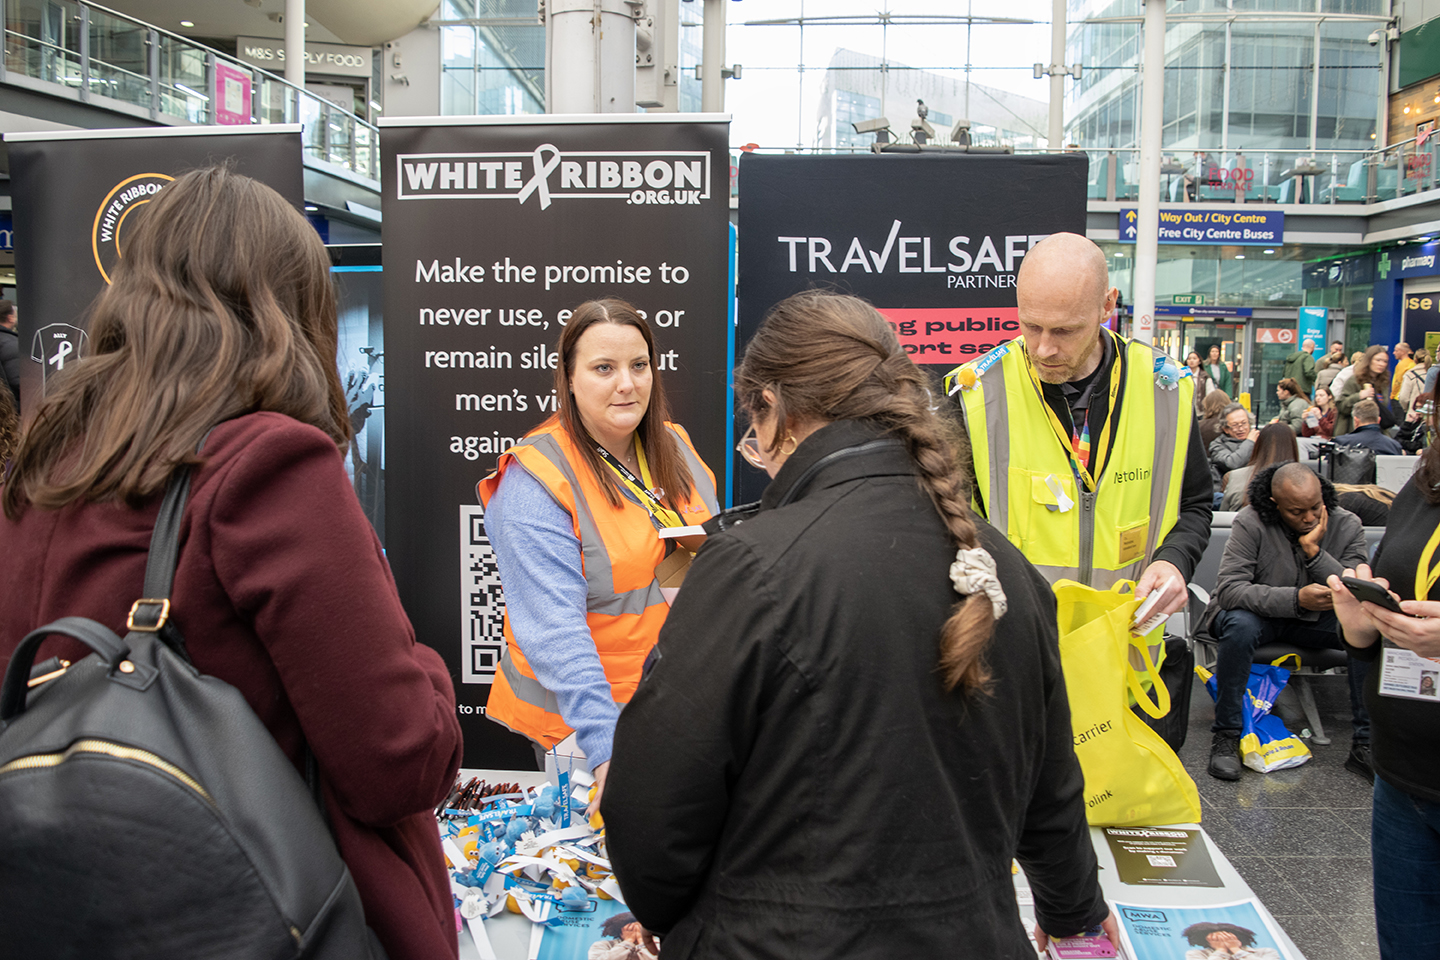 TfGM staff speaking to members of the public at a white ribbon event 